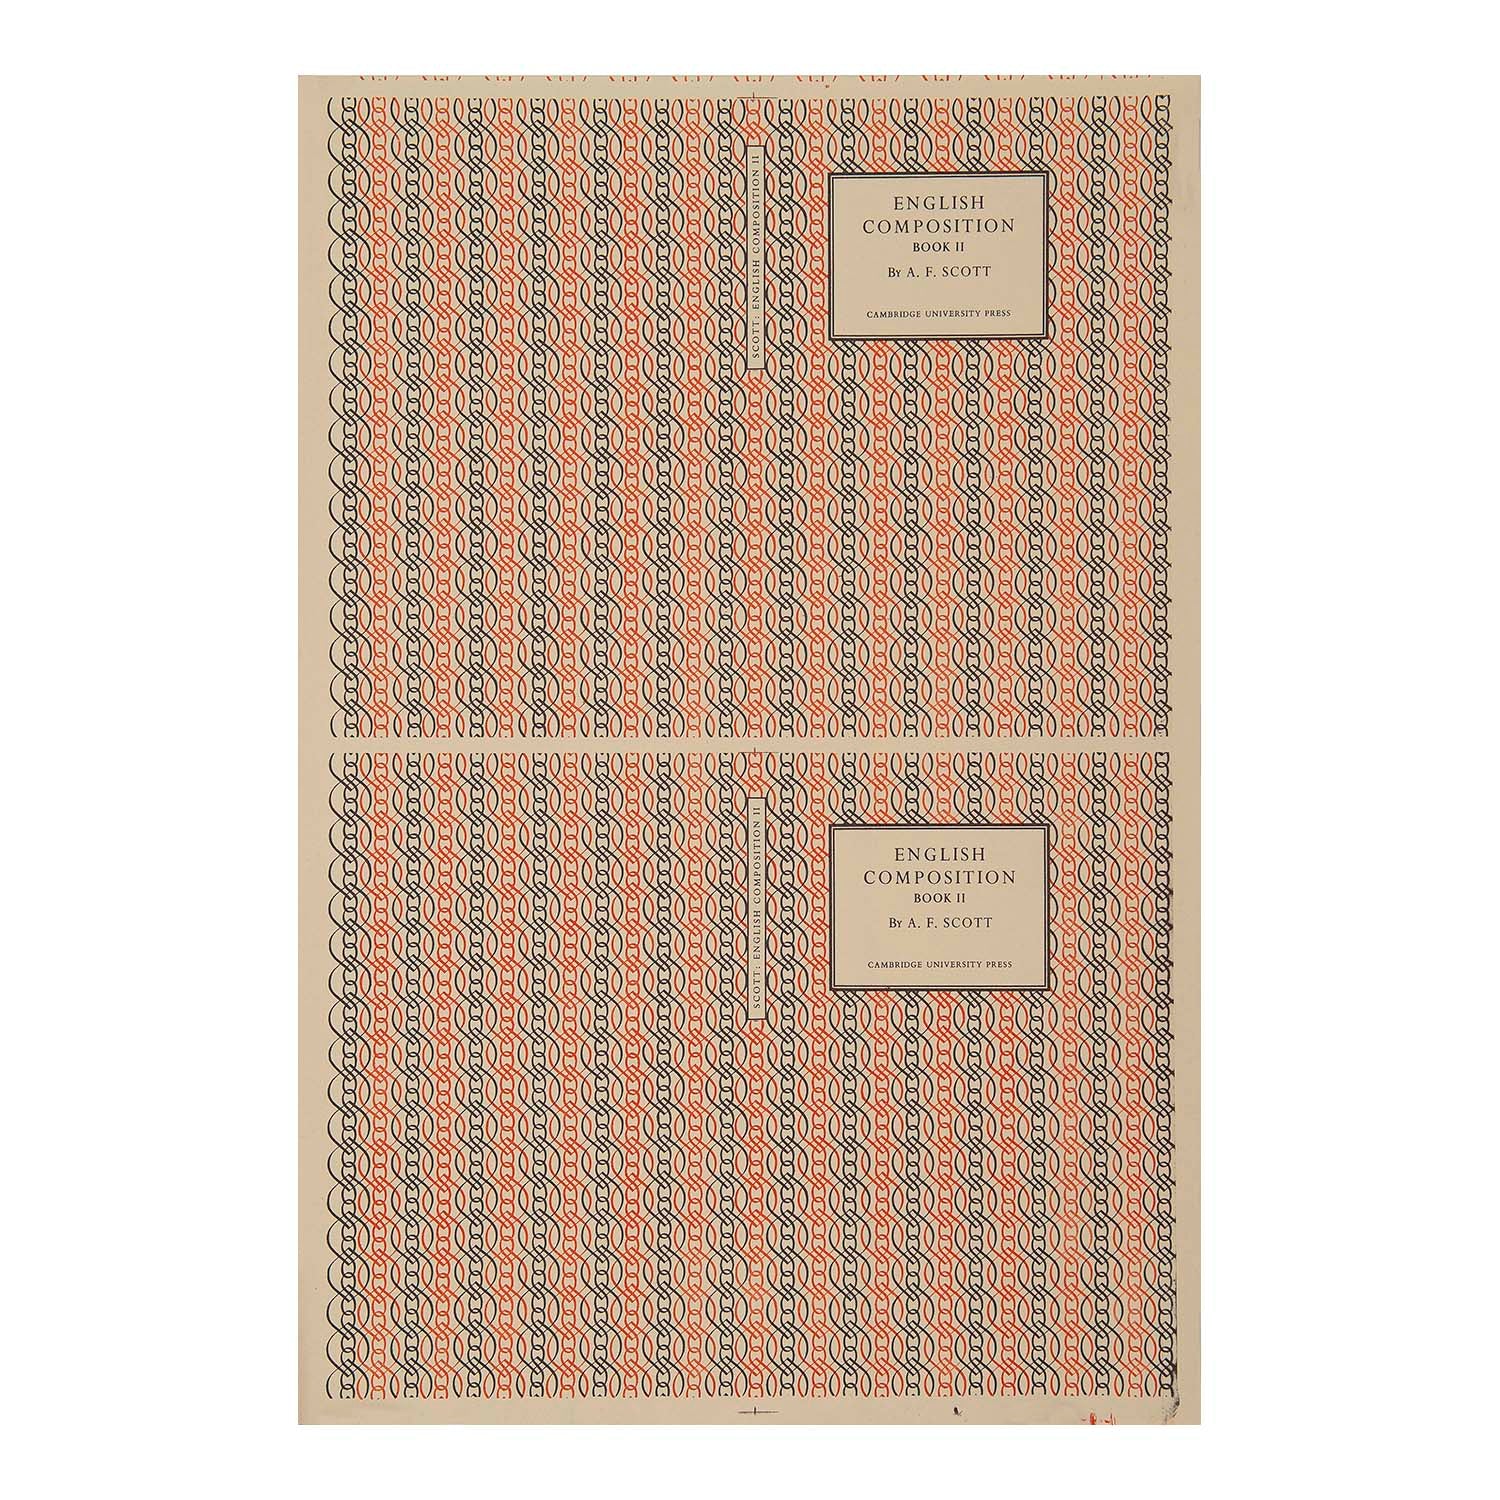 proof dustjacket, English Composition Book II by AF Scott, printed by the Curwen Press and published by the Cambridge University Press, 1951